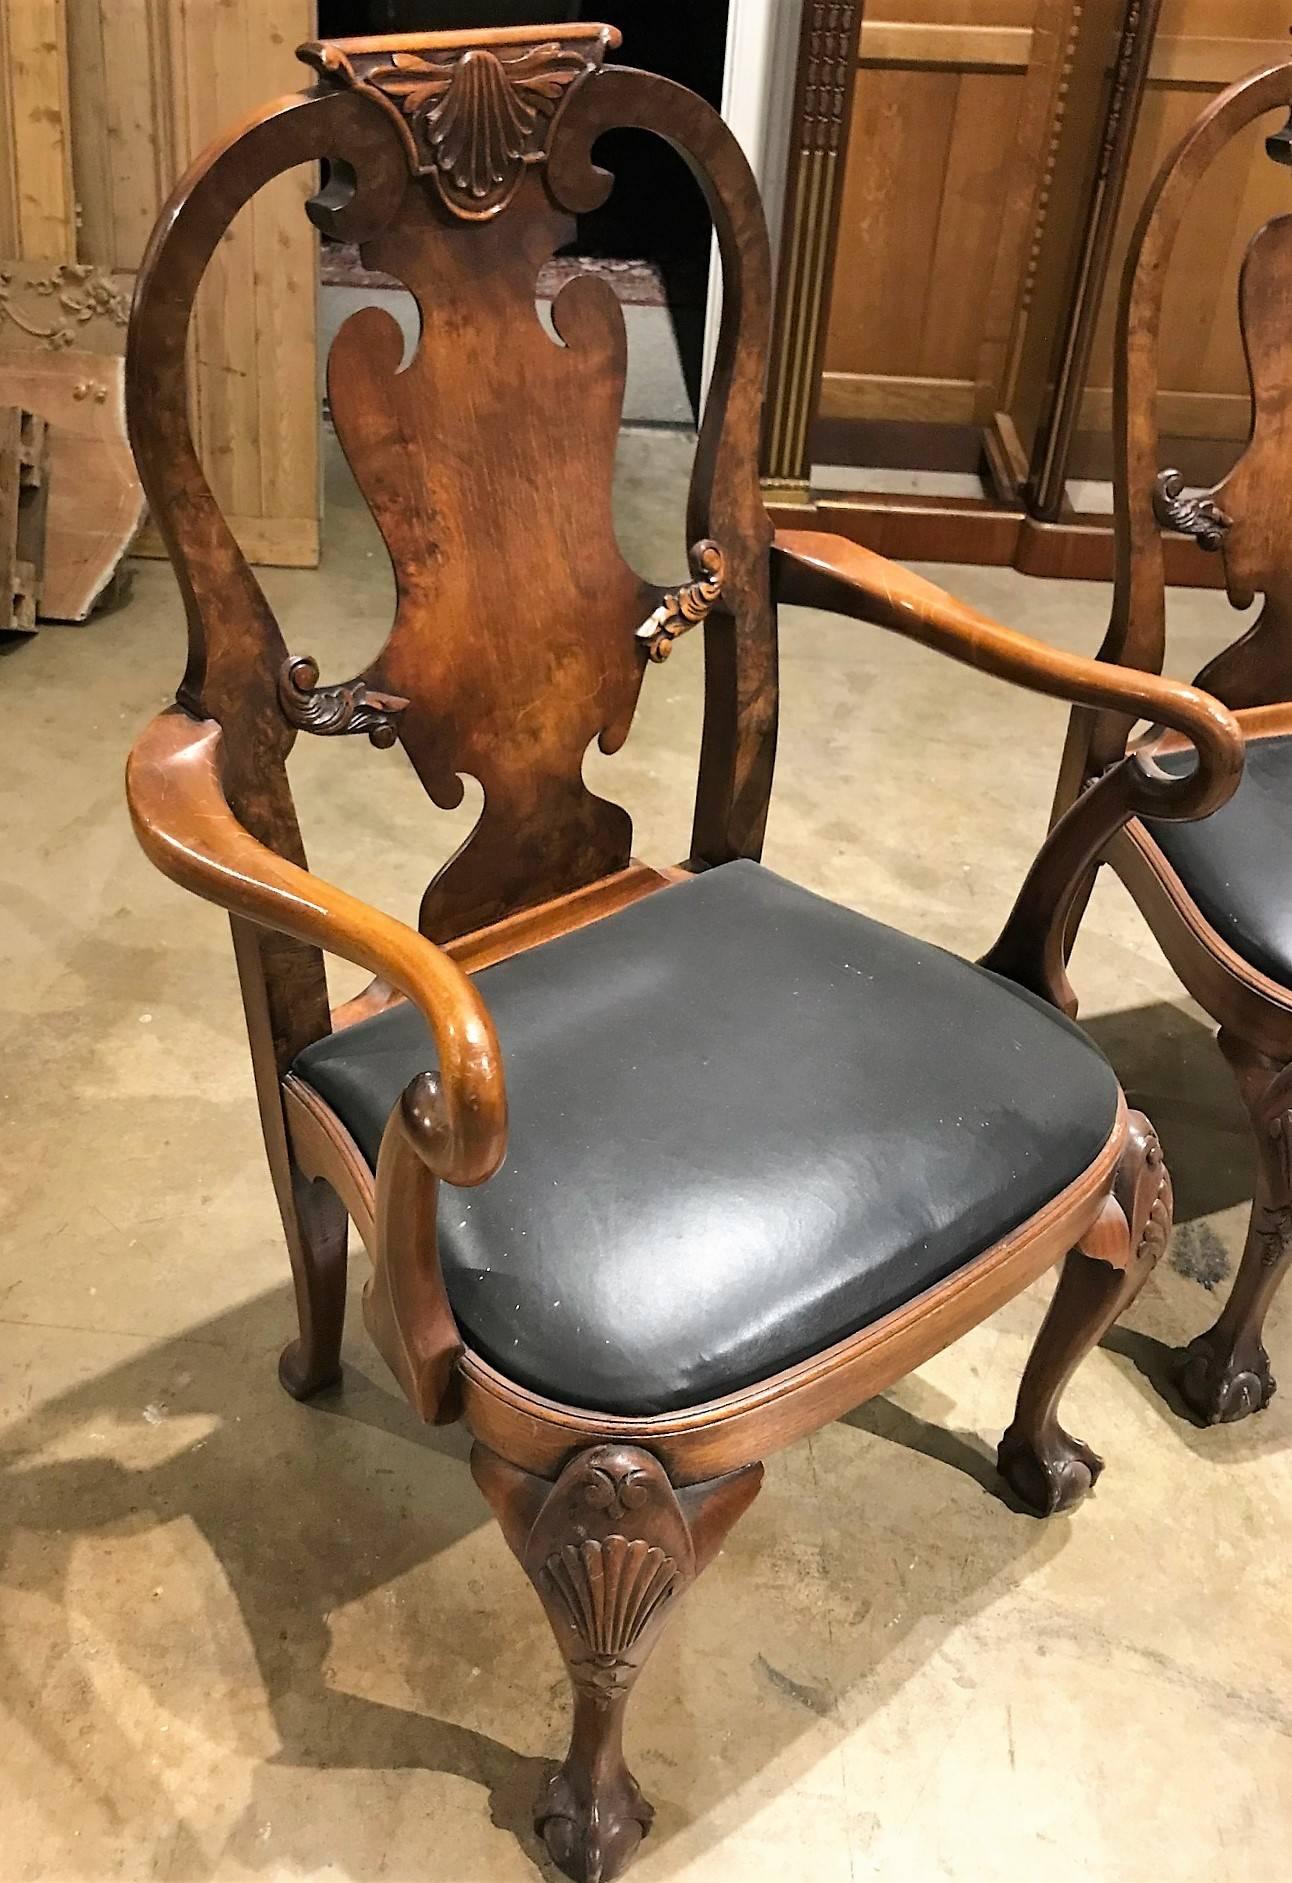 Superior set of eight antique English Queen Anne style walnut dining chairs with shell carved crests, balloon backs, and spooned splats. The front legs of cabriole form having shell carved knees ending in ball and claw feet. Each with slip seats.